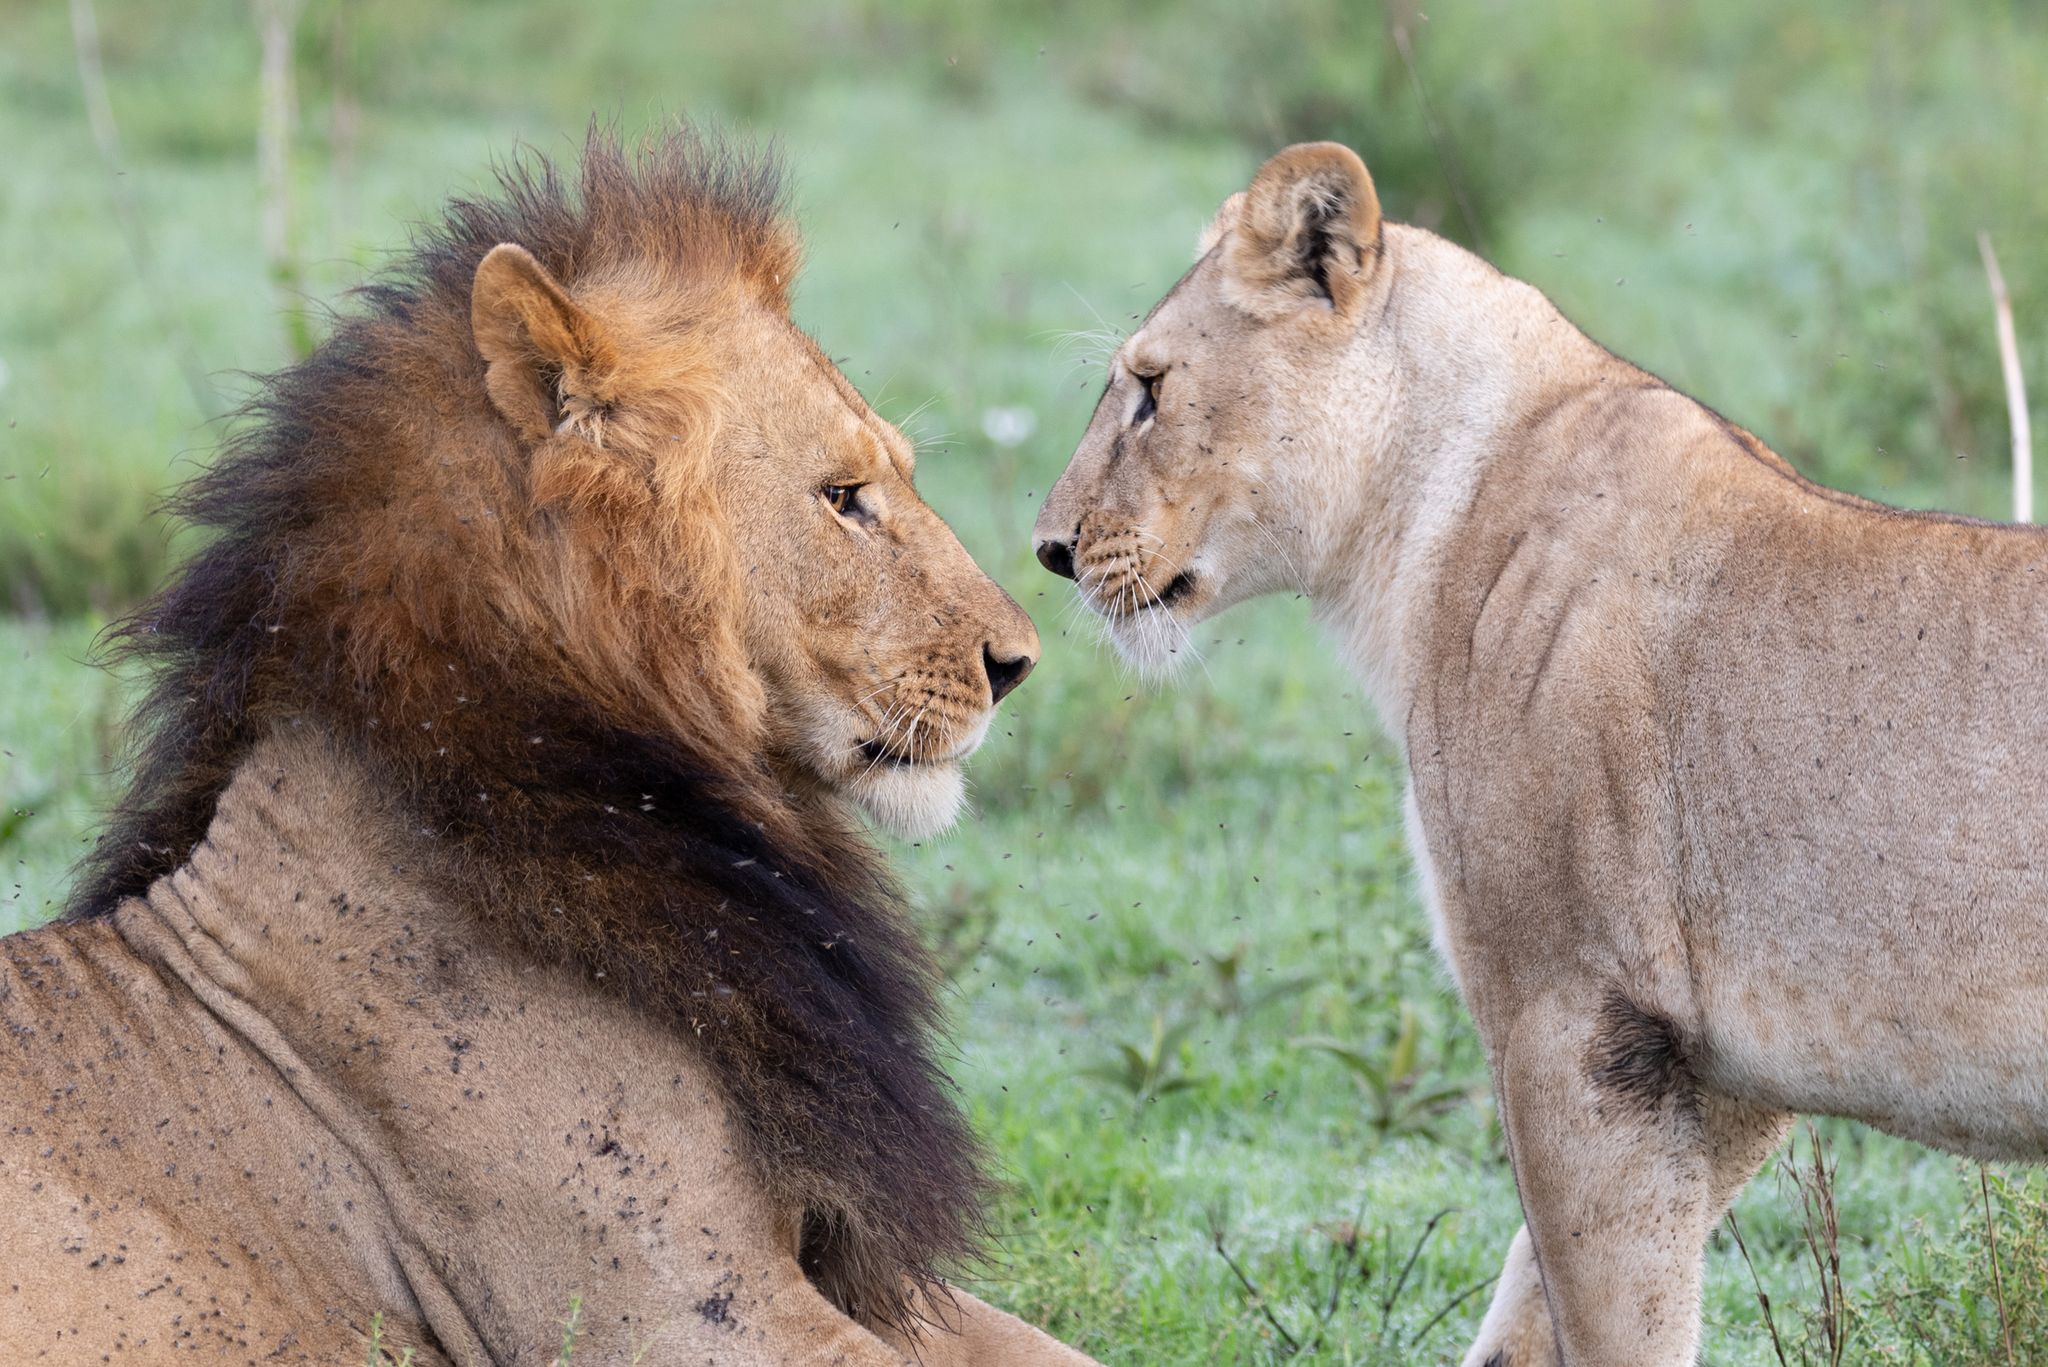 members of the same pride, a lioness and lion, greet each other